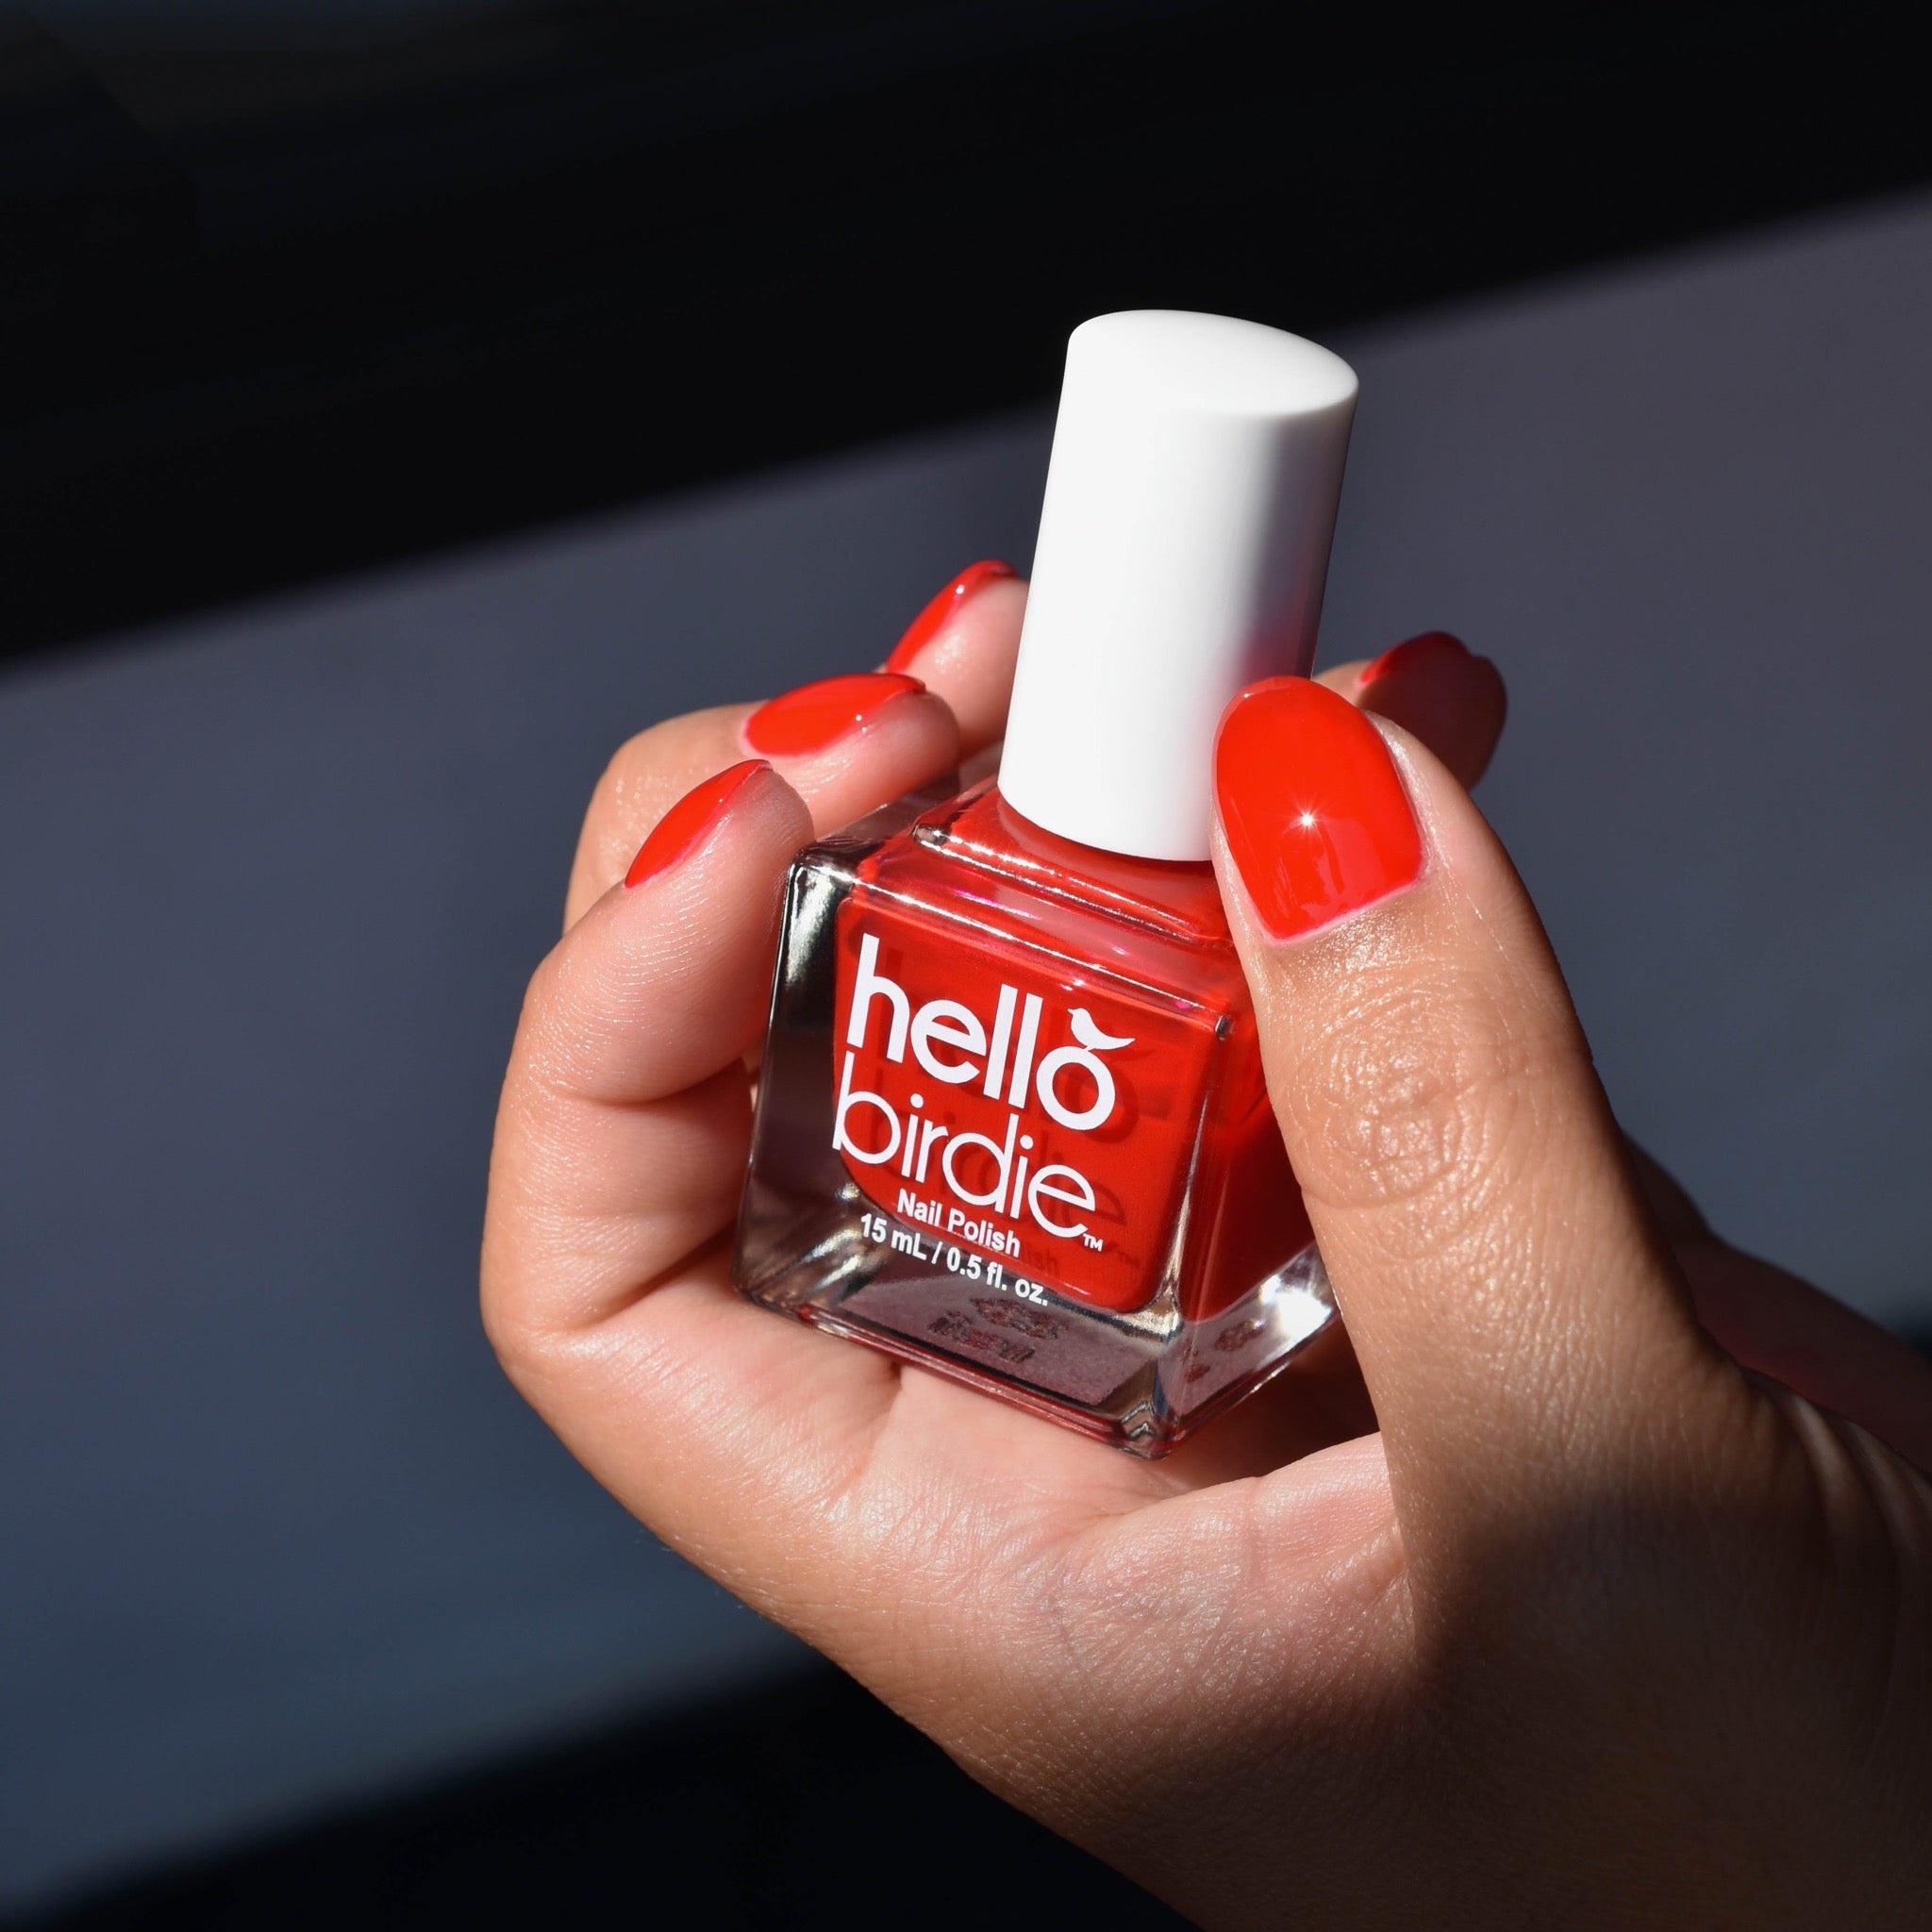 A close up of a hand comes into view from the lower right corner holding a bottle of Emuse Me nail polish from Hello Birdie which is a bright classic red hue. The model is also wearing the polish and the nails are glossy. The bottle has a cube shape, white cap, and white text with logo. A beam of light illuminates the hand within a black space.